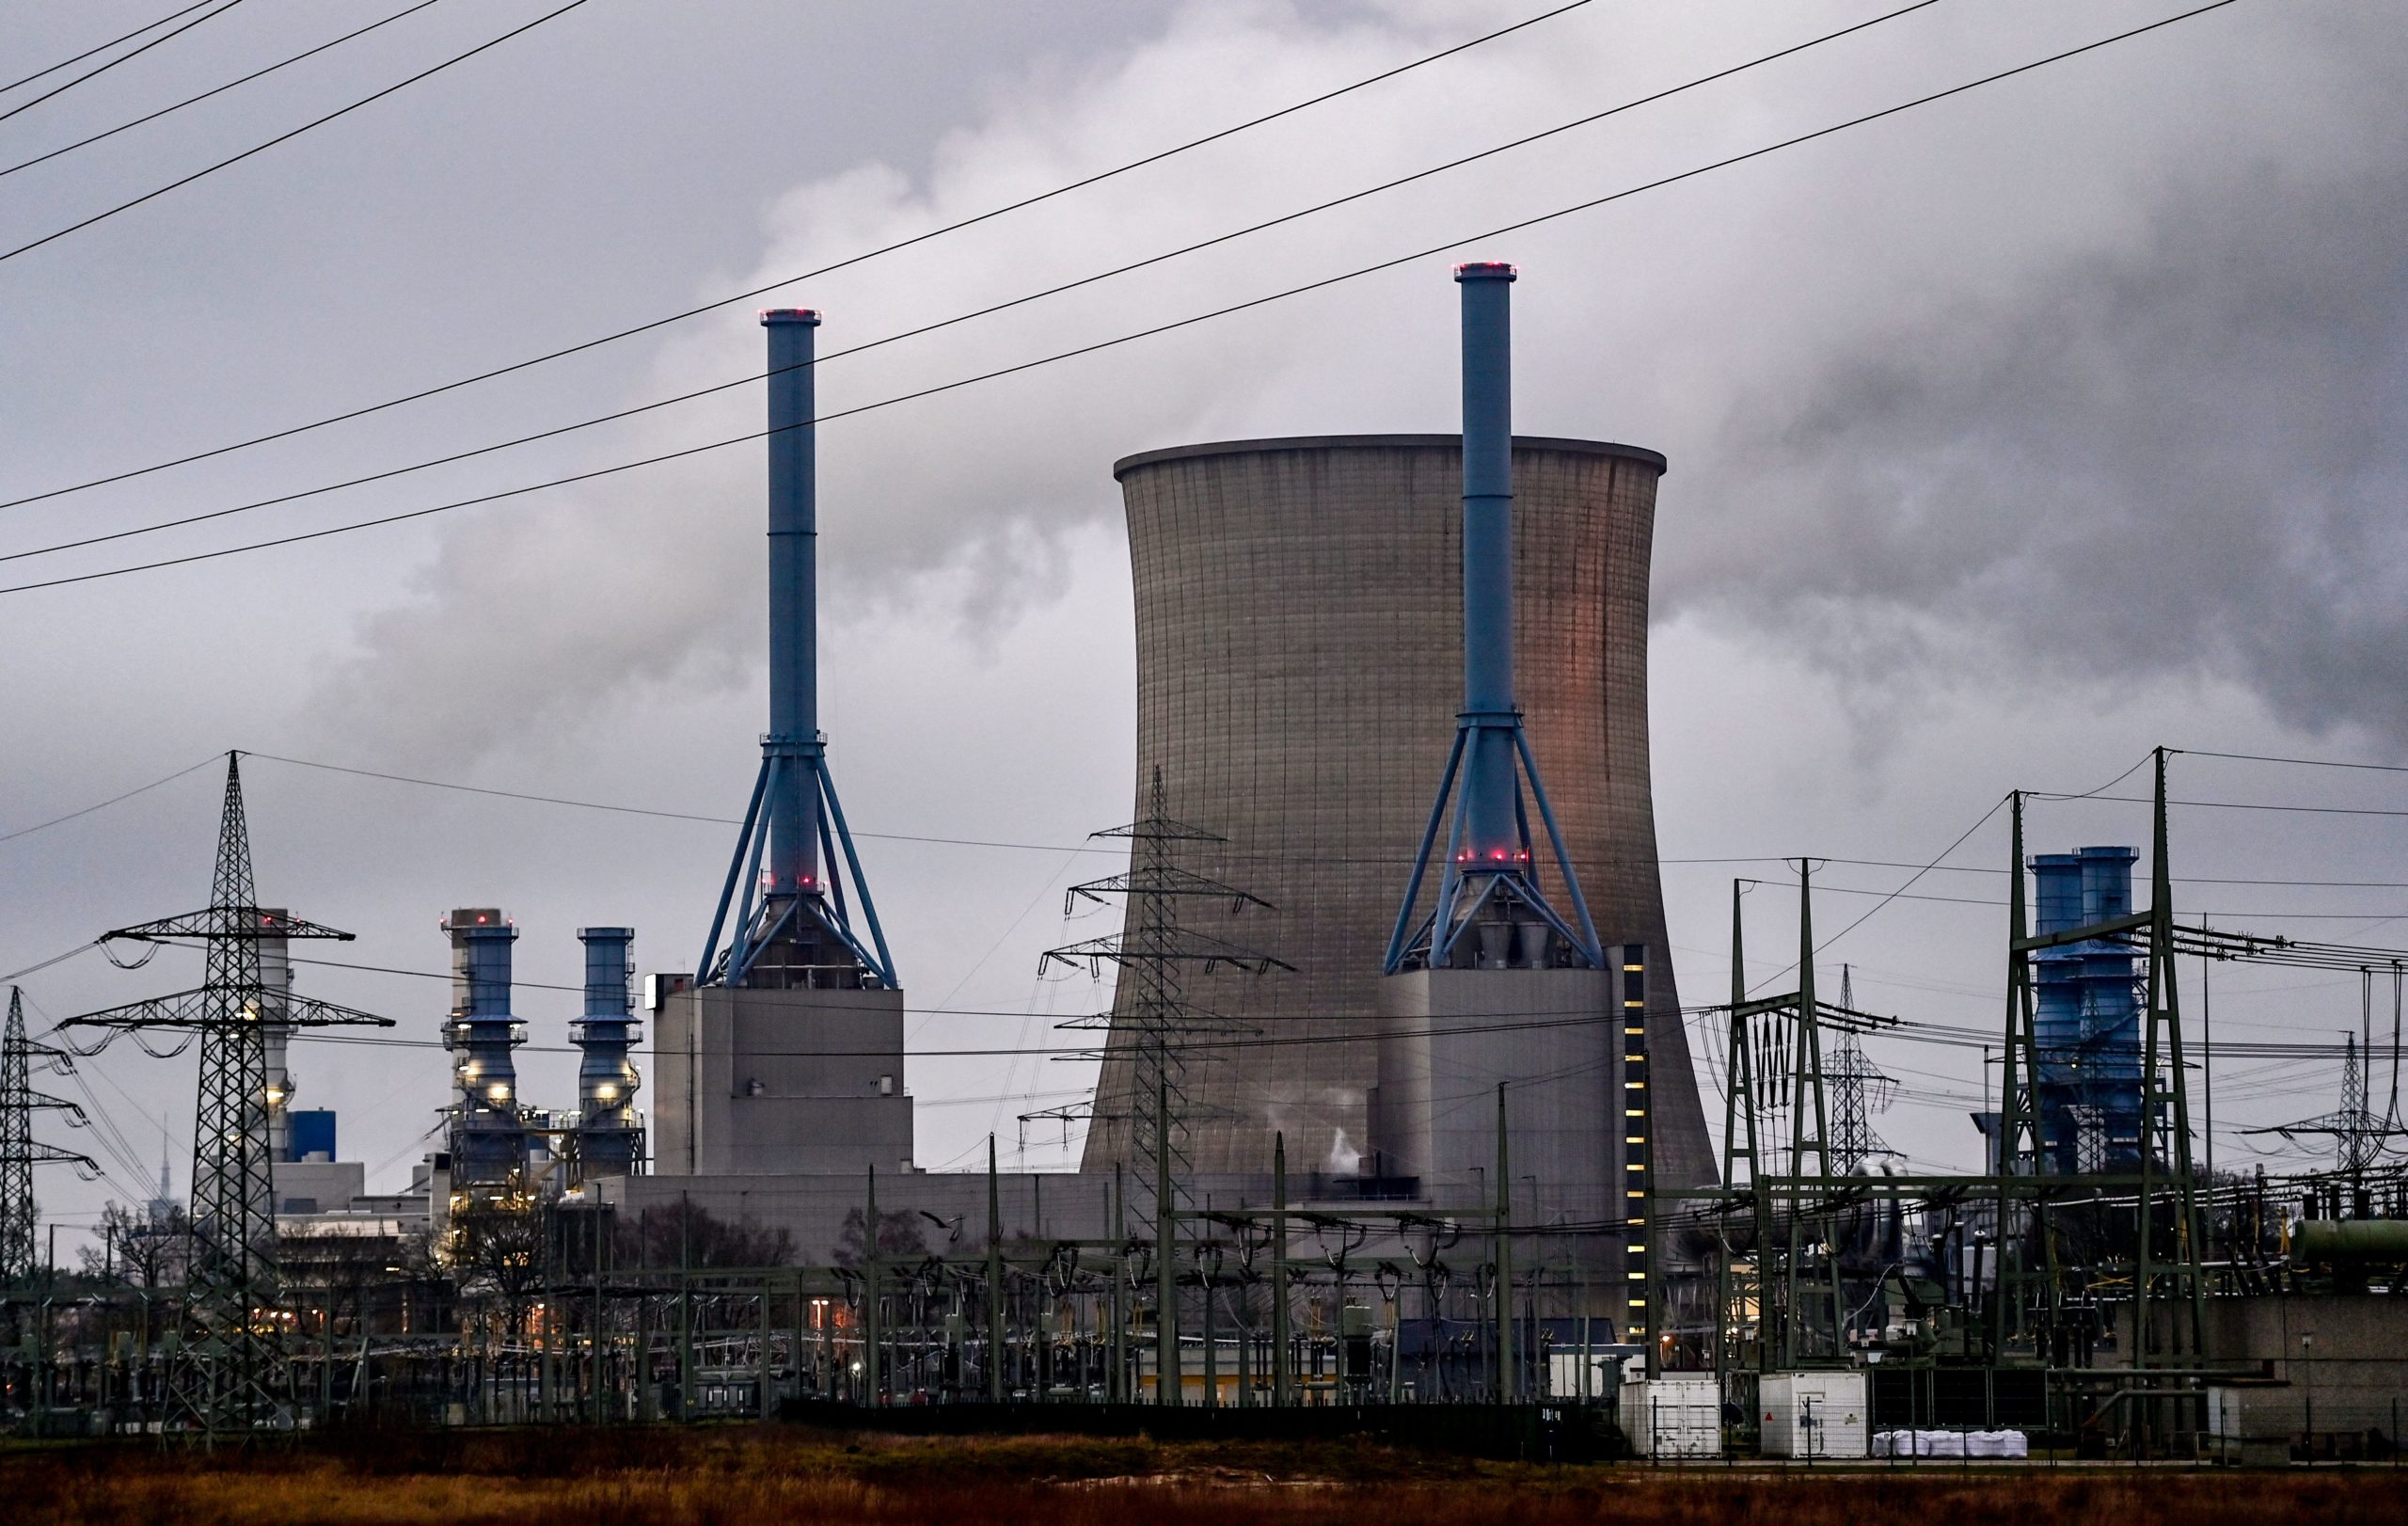 A gas-fired power plant in pictured in Lingen, Germany on Jan. 12. (Ina Fassbender/AFP via Getty Images)